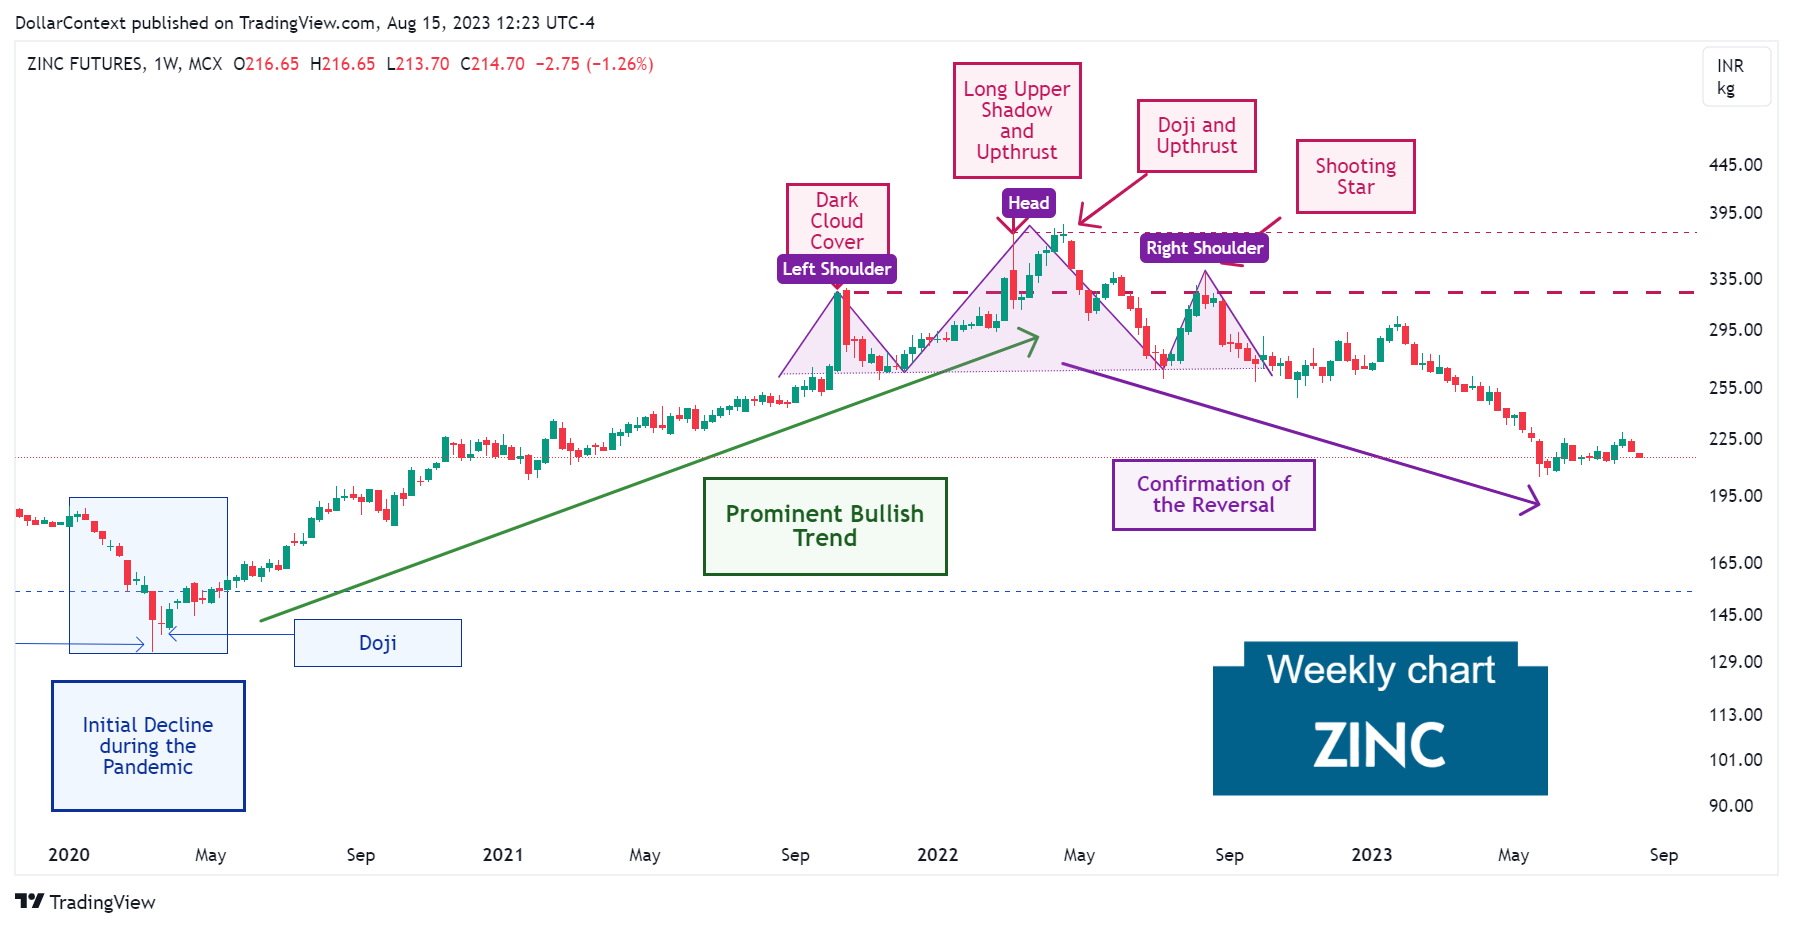 Zinc Futures: Head and Shoulders Pattern